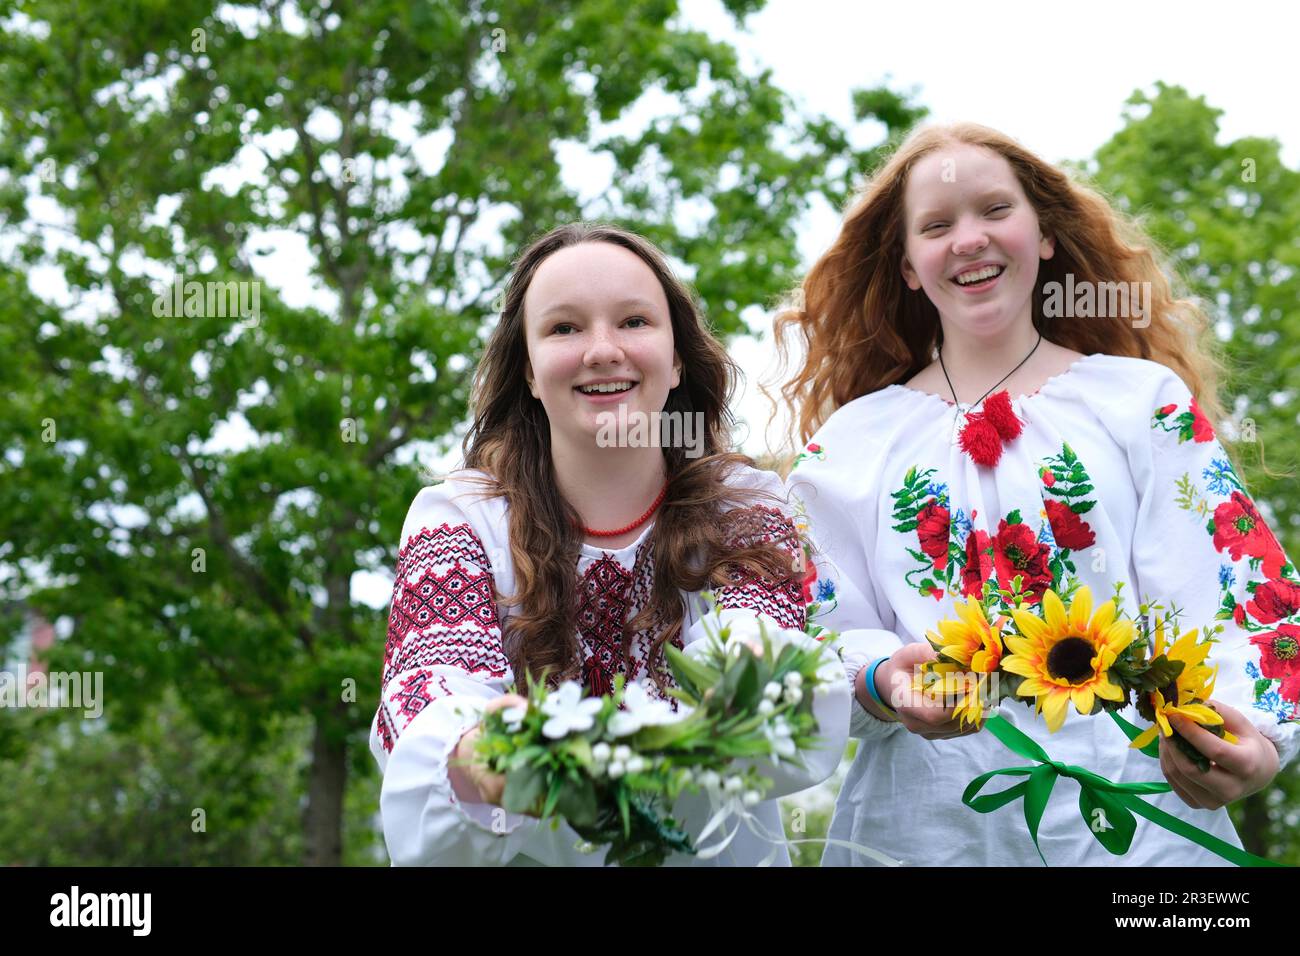 beautiful young girls wearing embroidered shirts laughing smiling putting wreaths on water facing camera stretching out wreaths to us different sunflowers Field flowers girl has red bright sunny hair Stock Photo